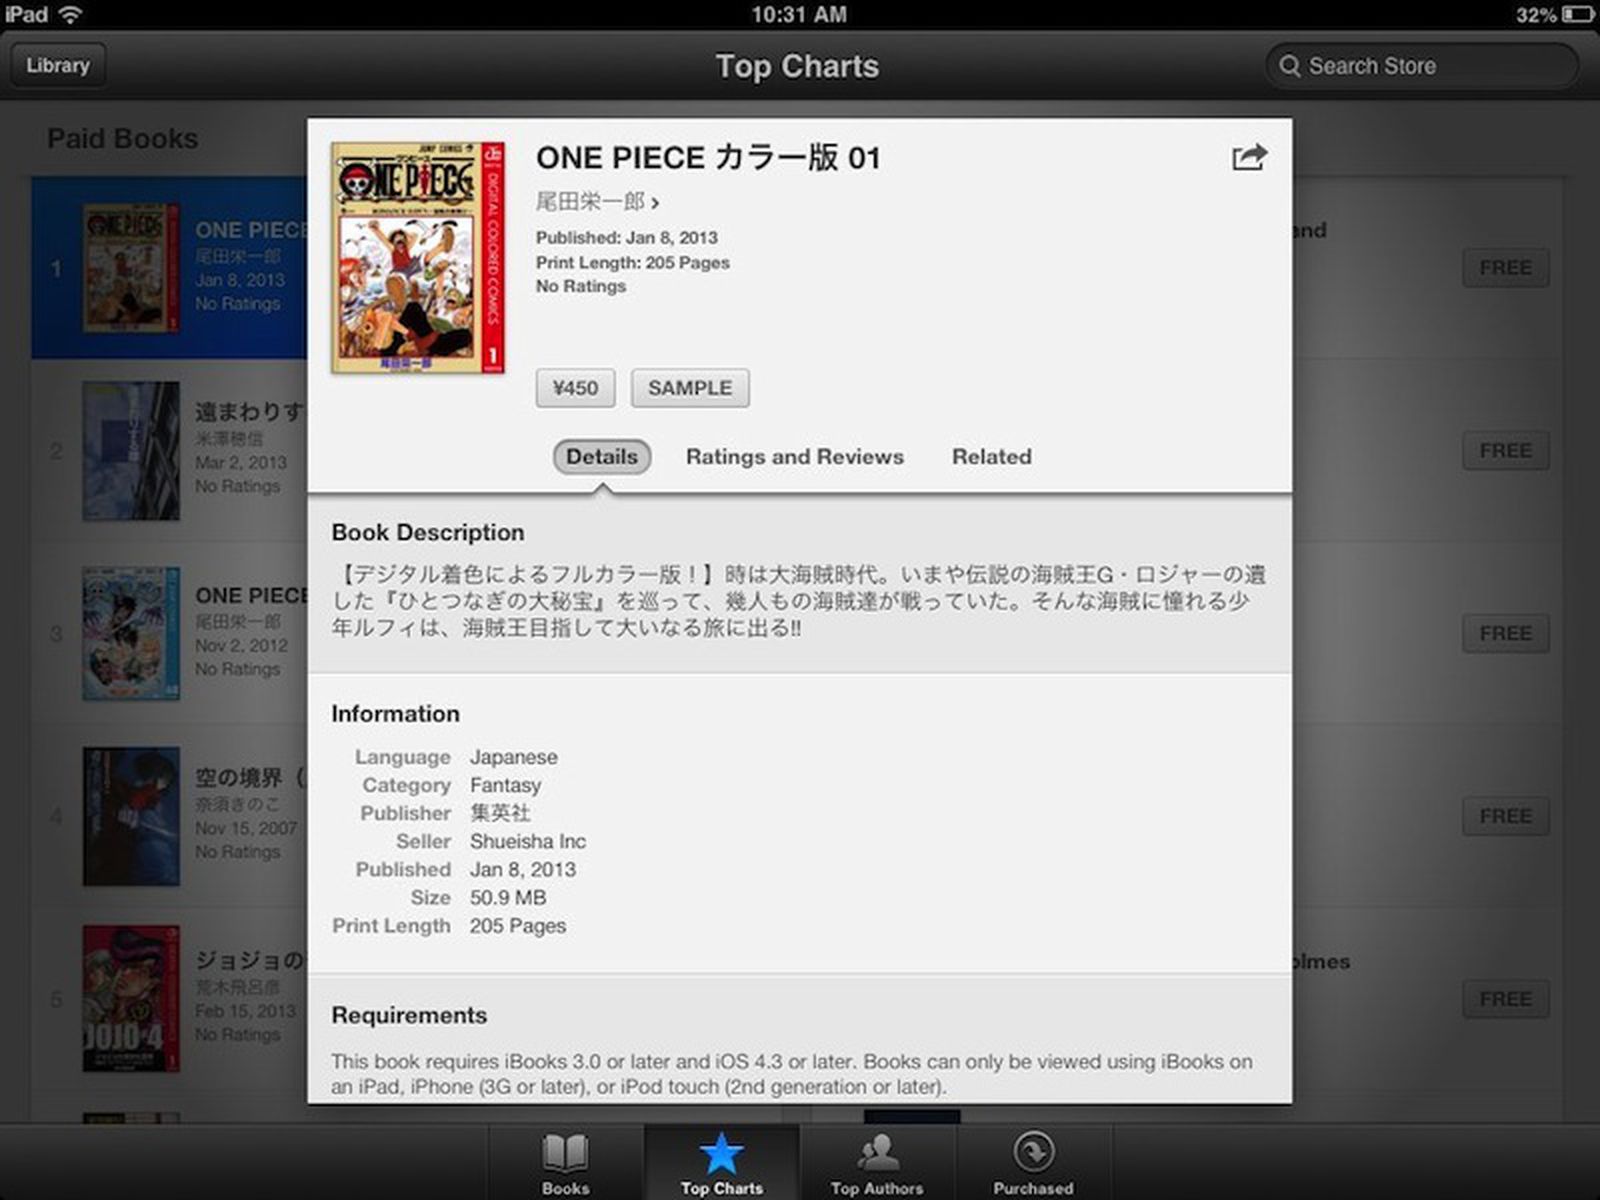 Apple Updates Ibooks With Paid Japanese Books Greater Asian Language Support Macrumors